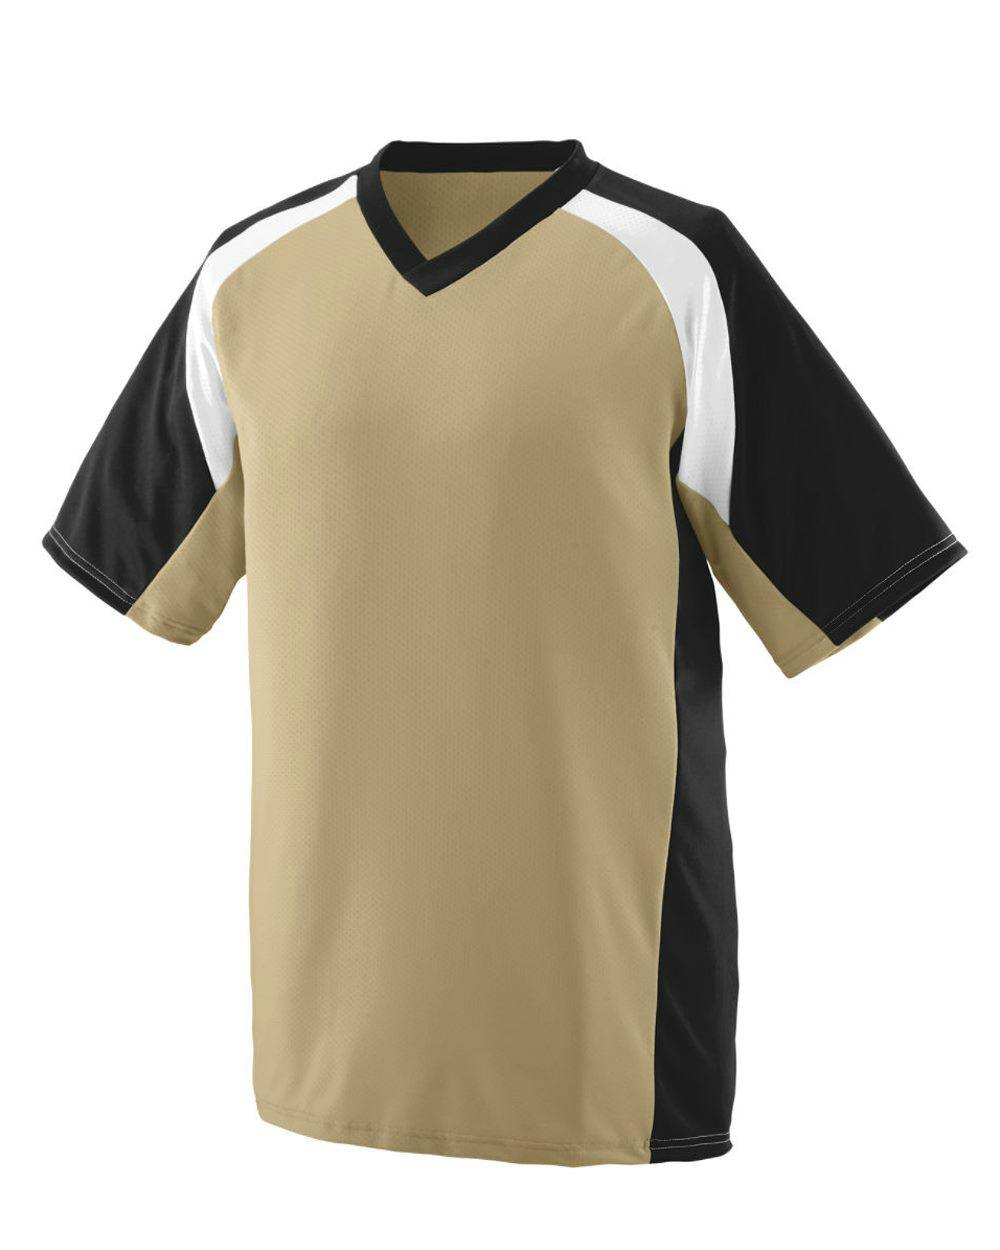 Image for Youth Nitro Jersey - 1536